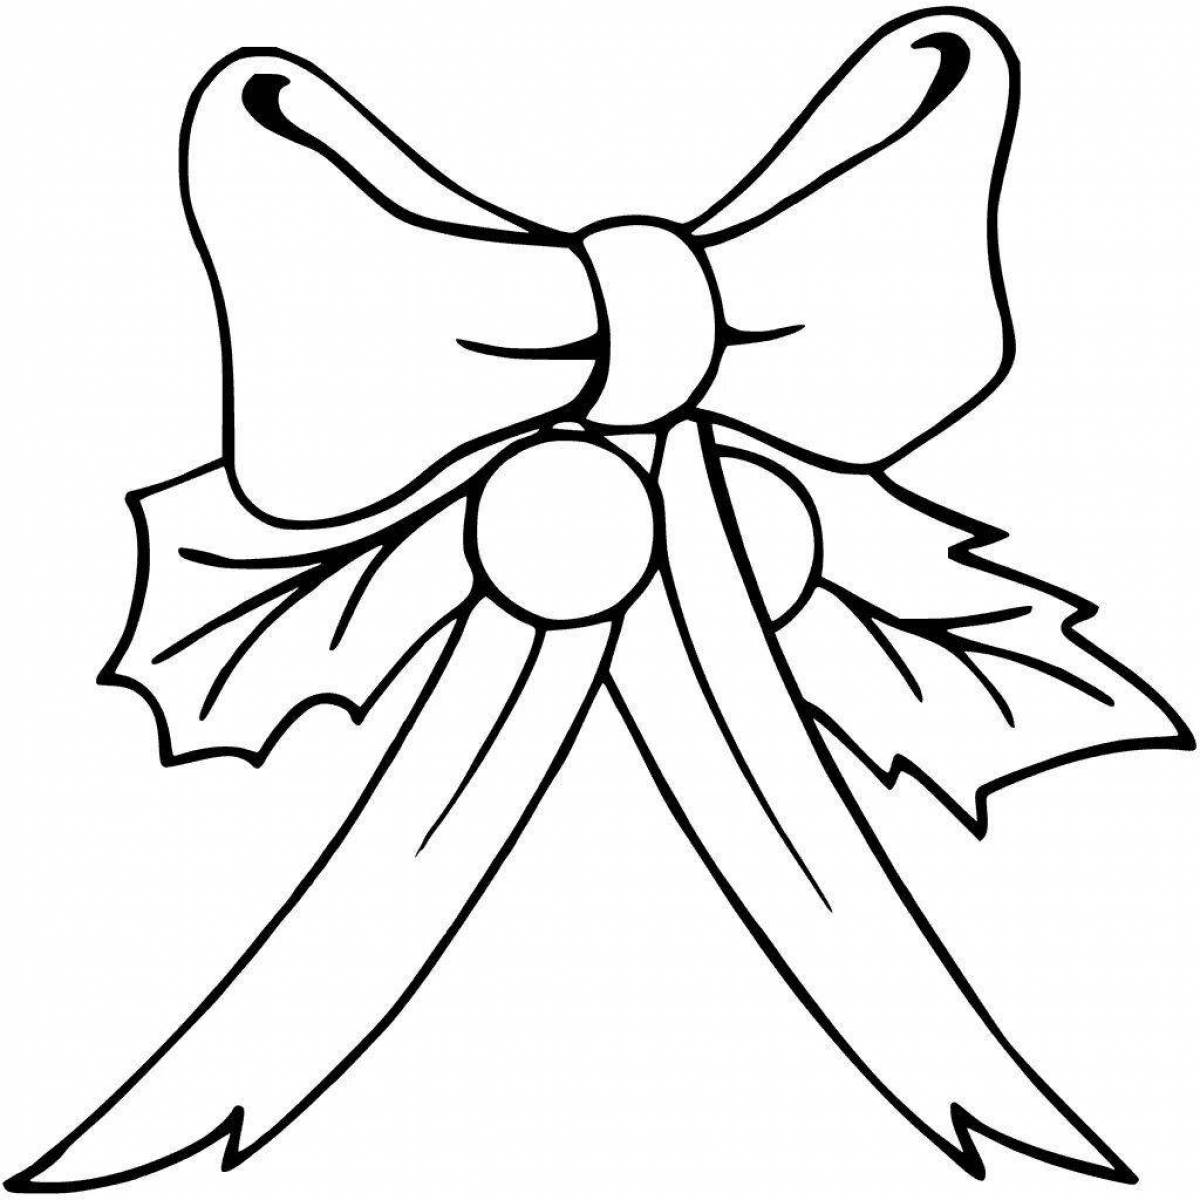 Coloring page with colorful bow for kids